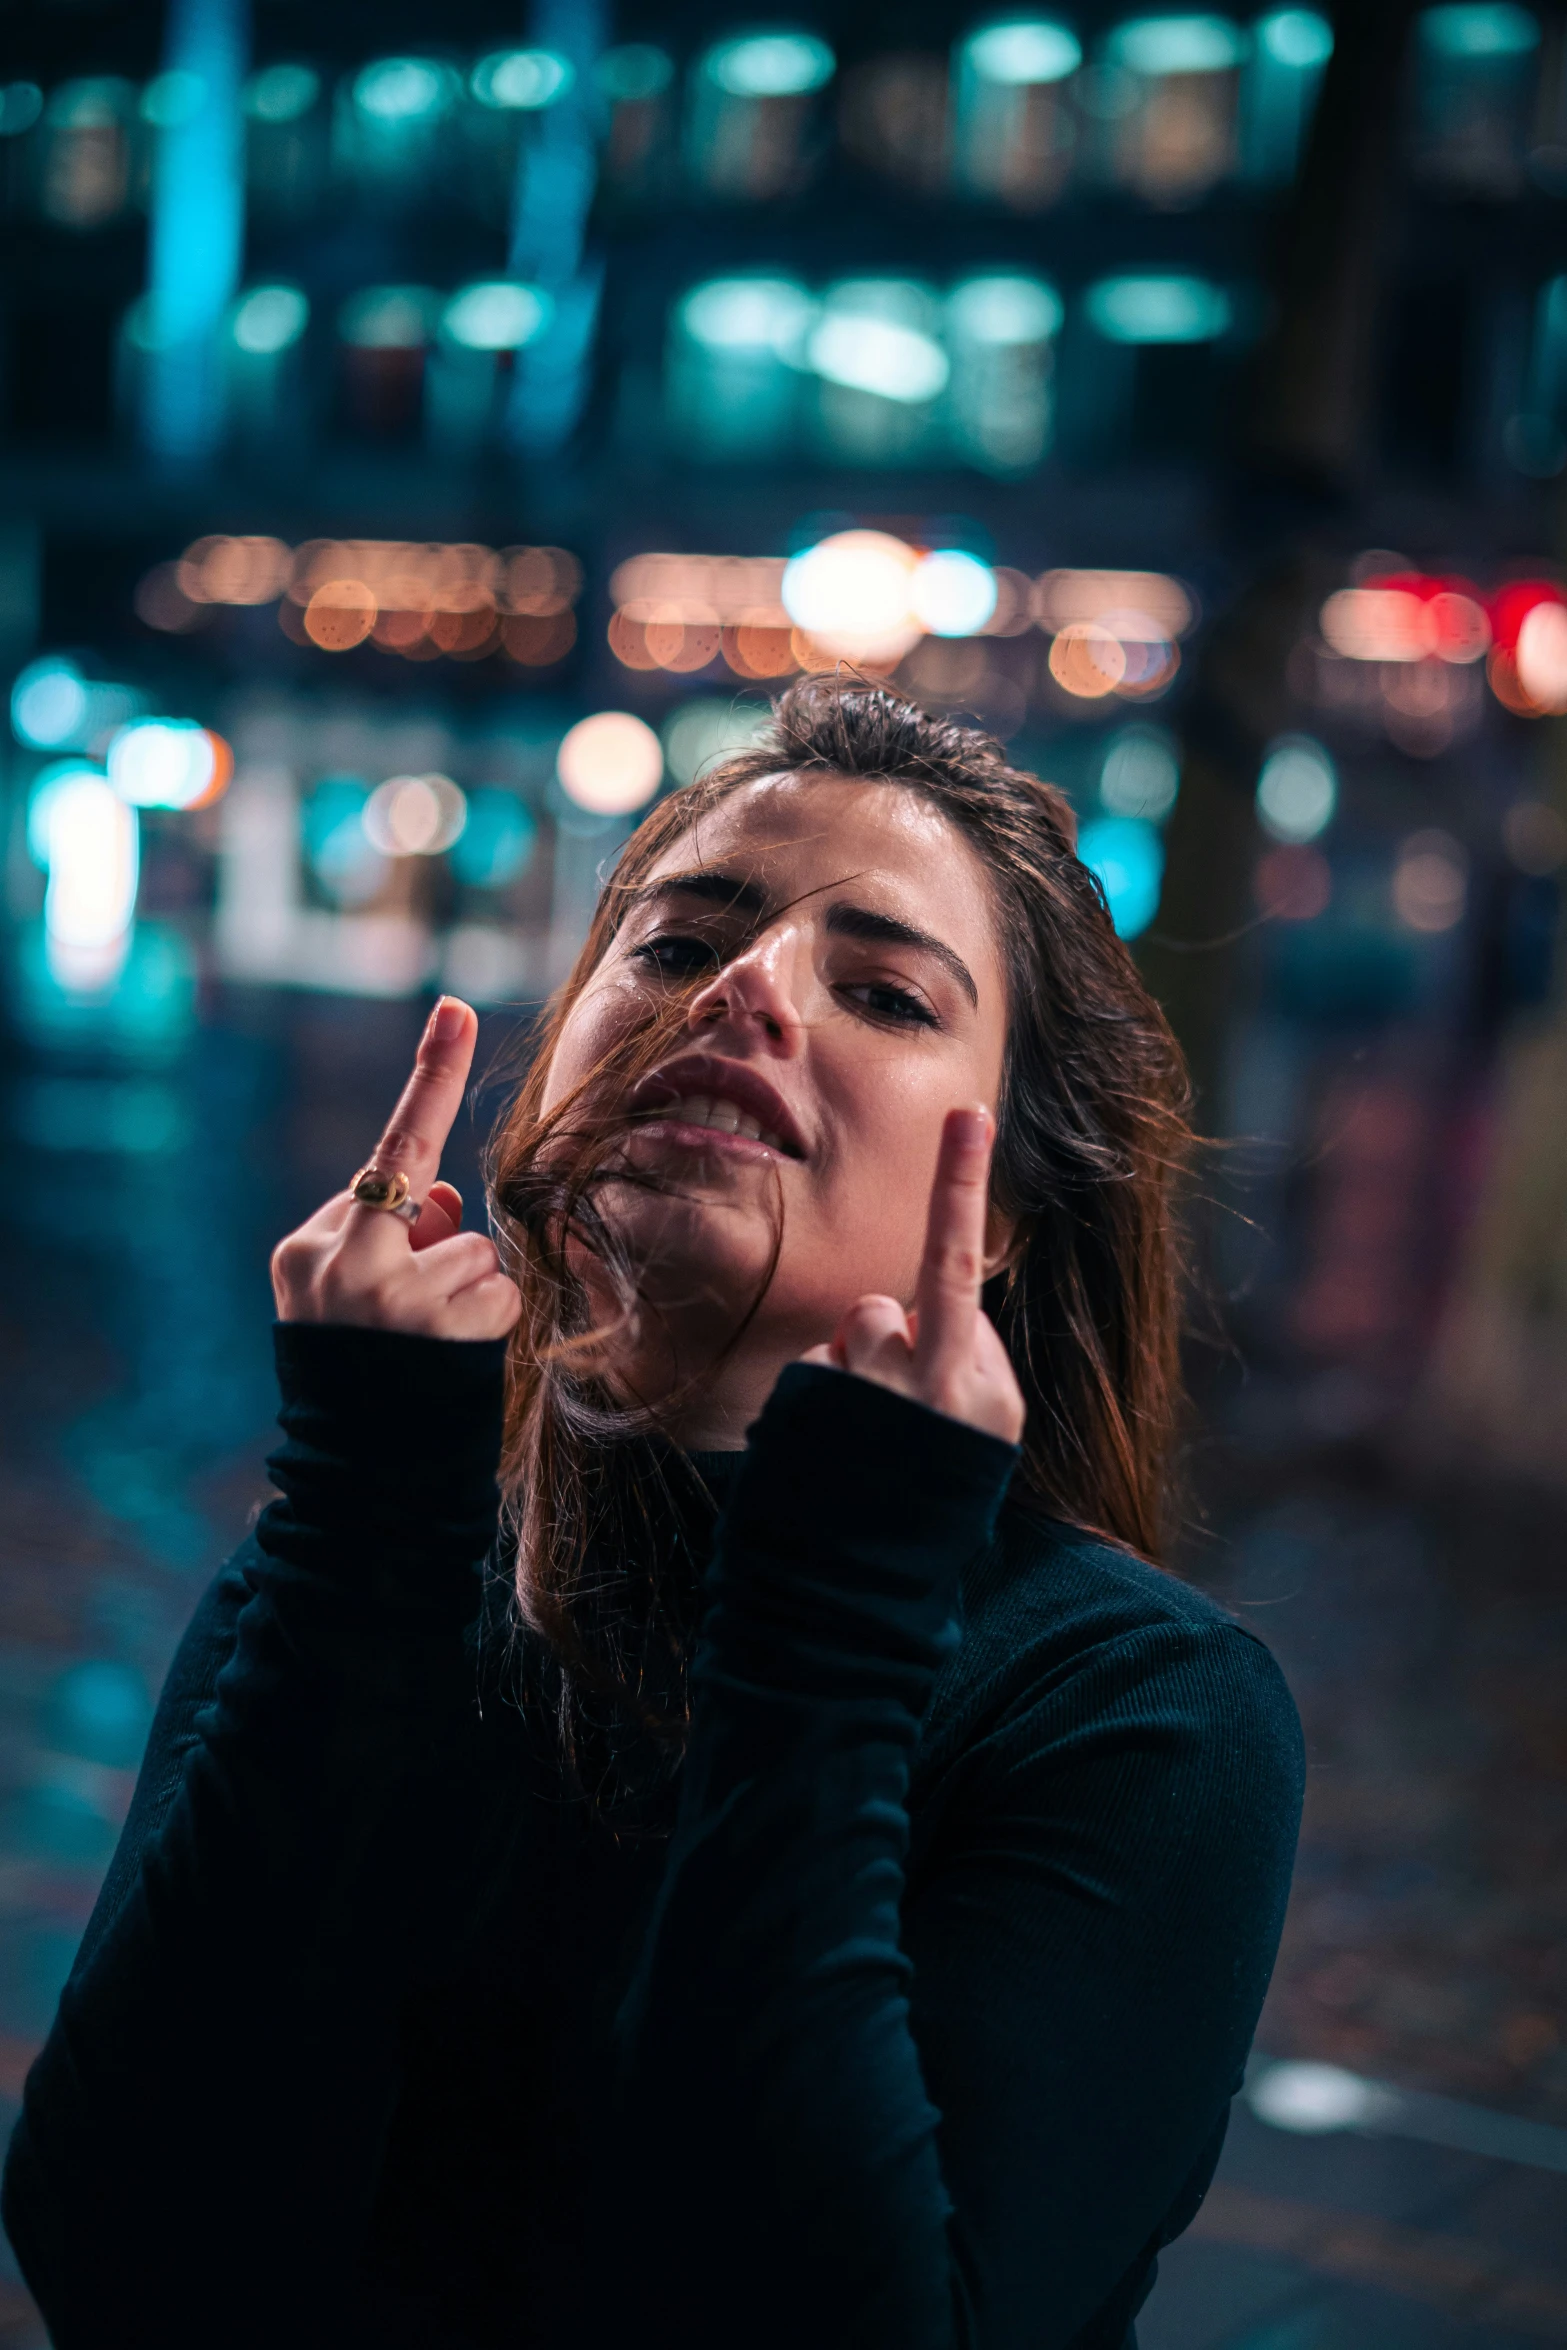 woman making stop gesture next to the street at night